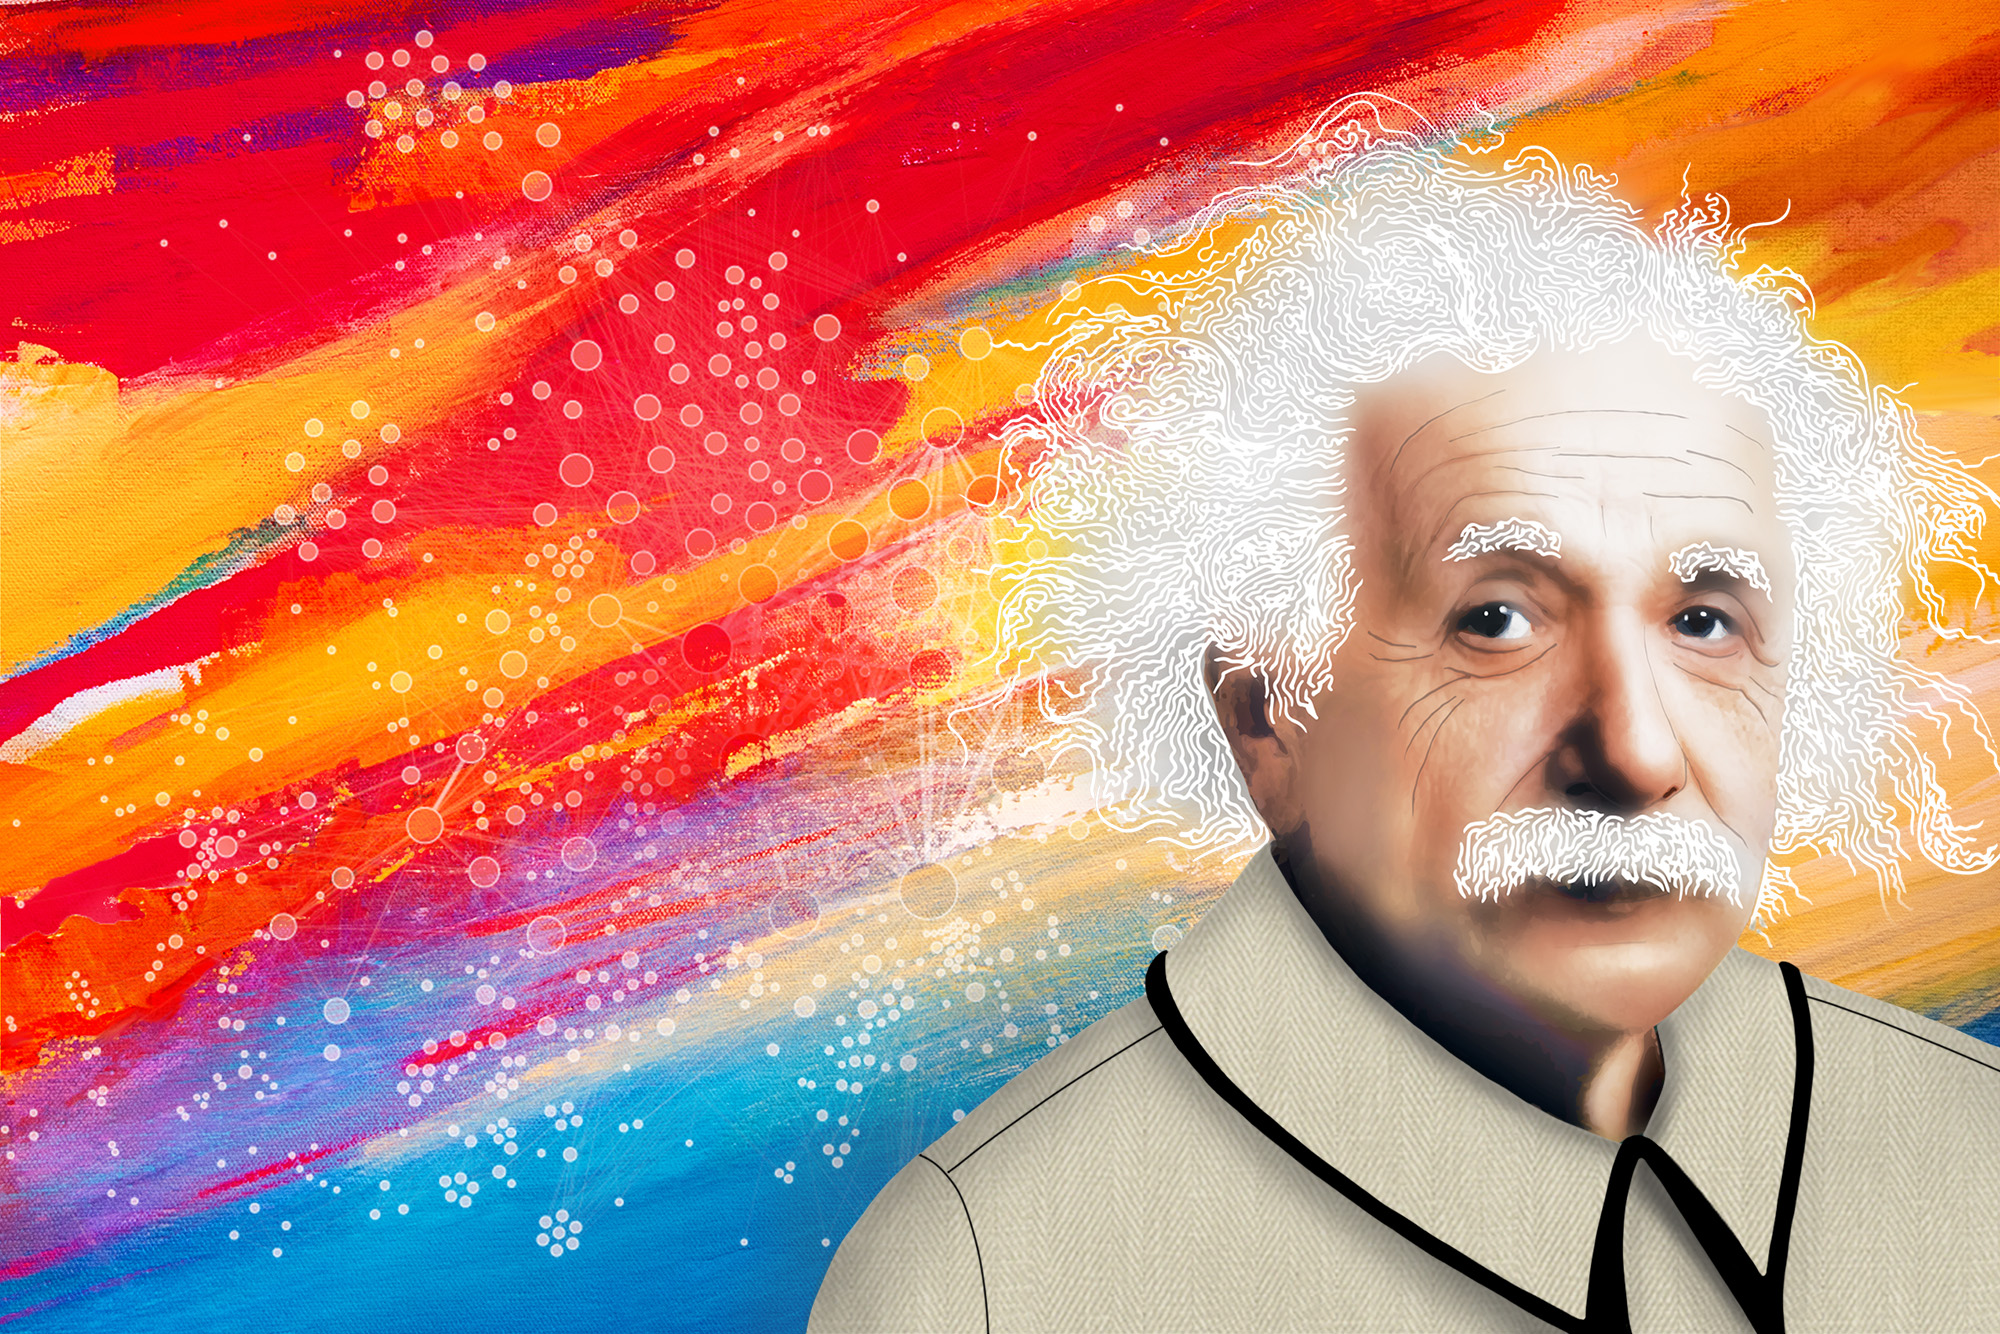 an illustration of Einstein over a paint color texture background